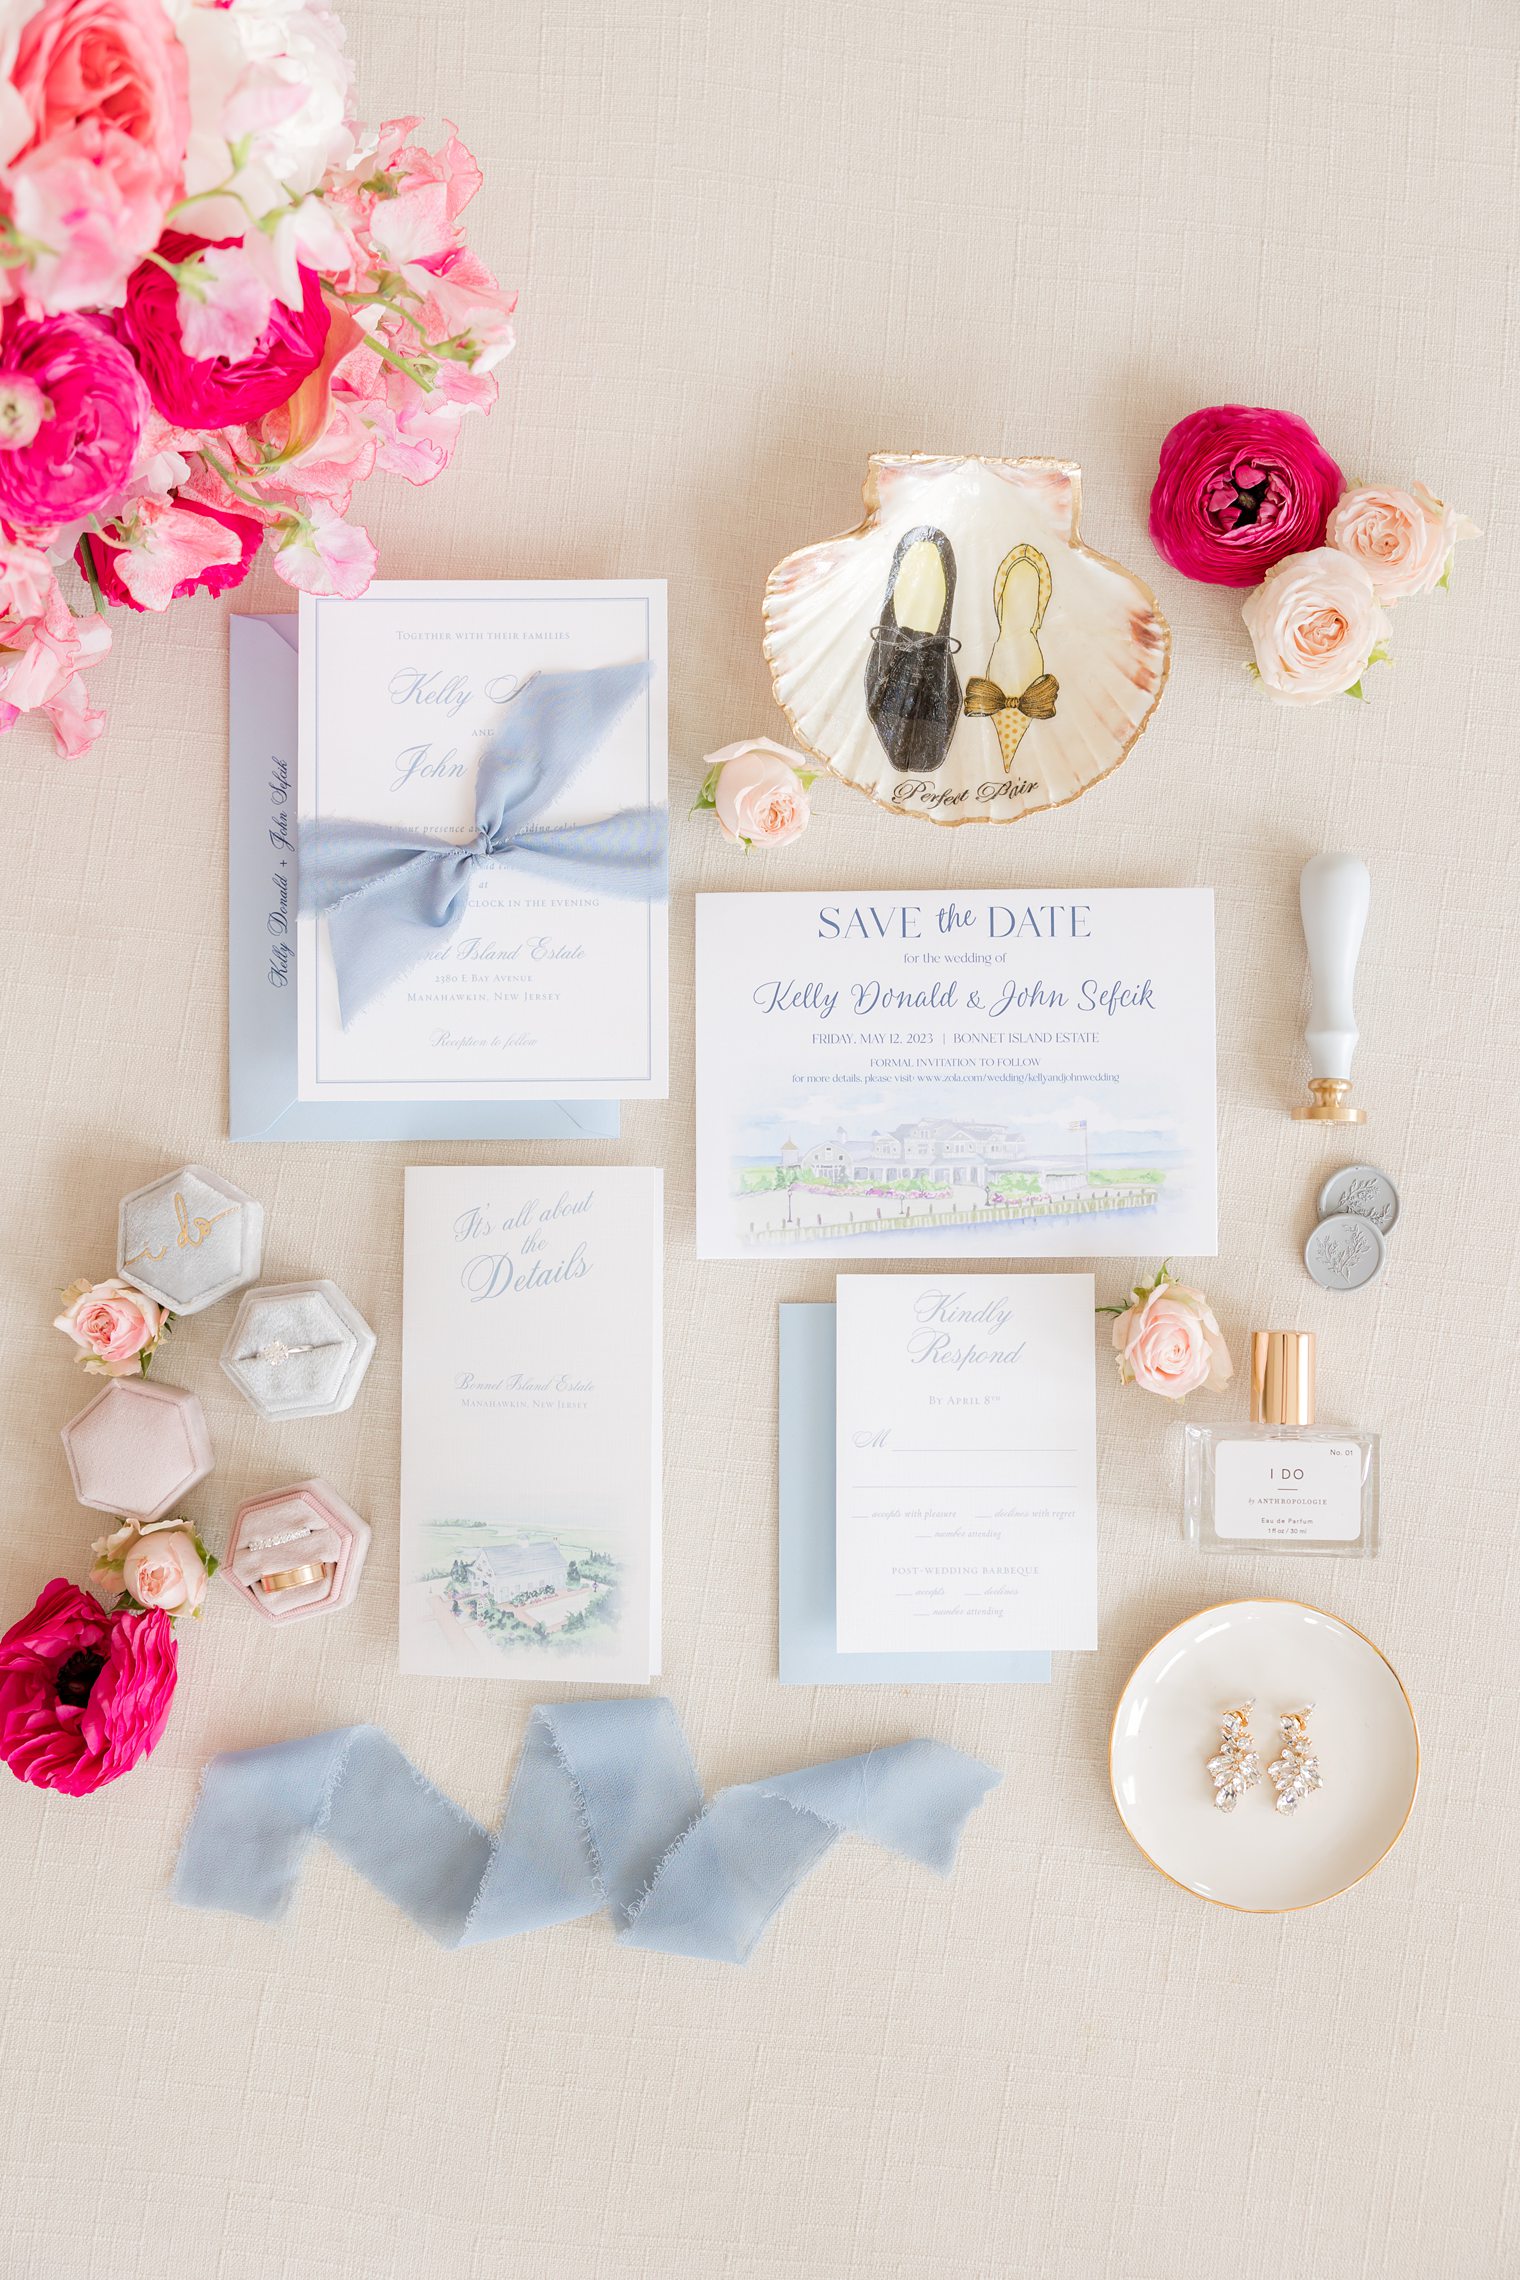 Wedding invitation details with shades of blue and pops of pink